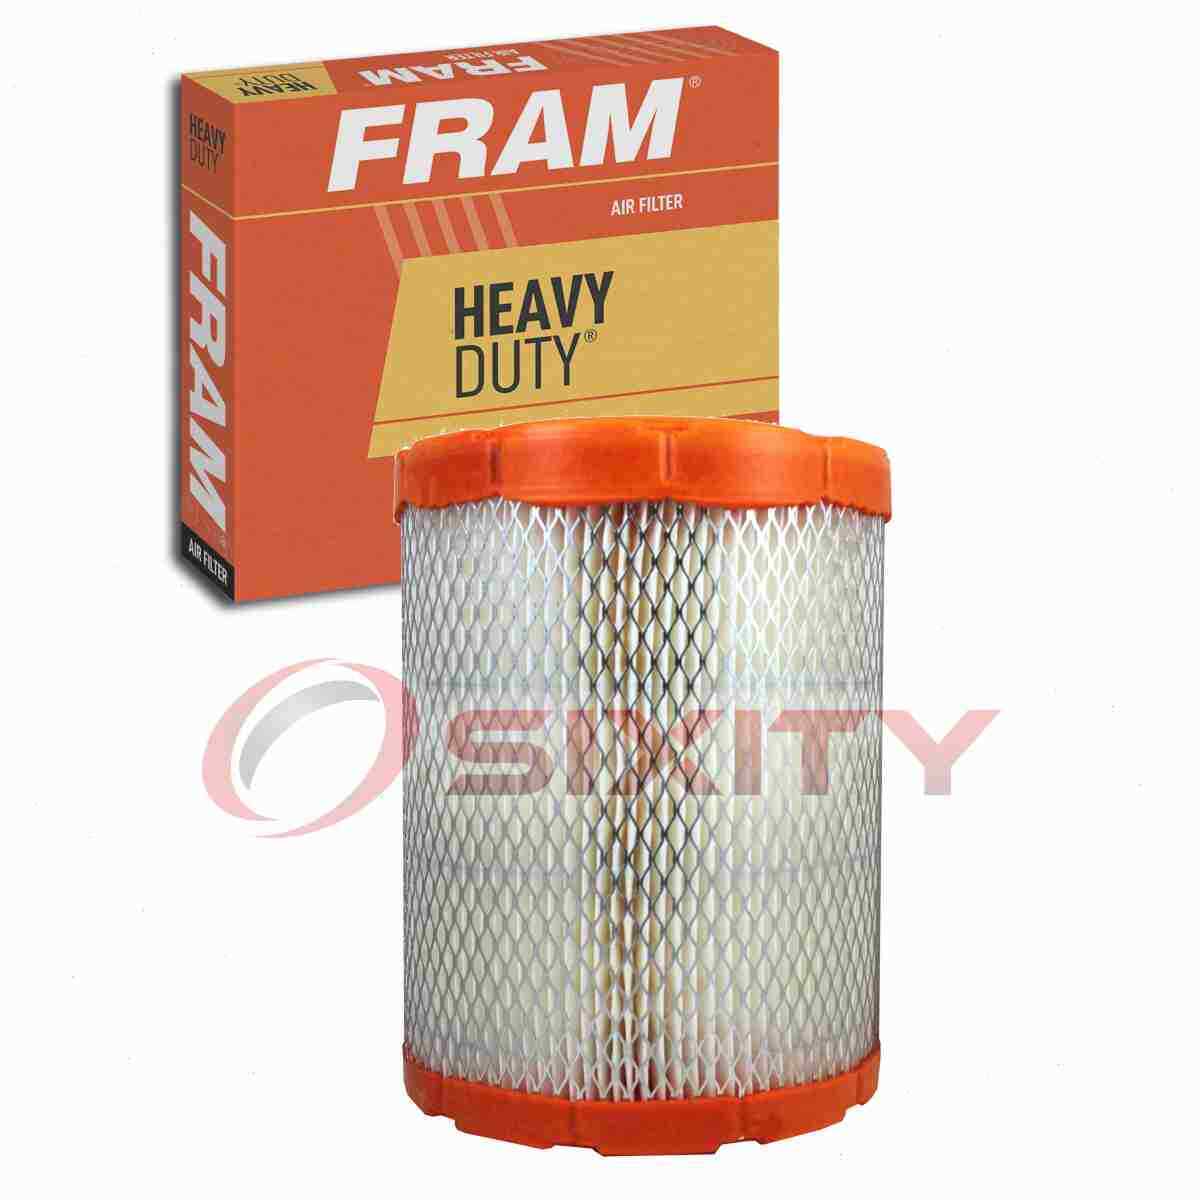 FRAM Heavy Duty Air Filter for 2005-2009 Saab 9-7x Intake Inlet Manifold qy